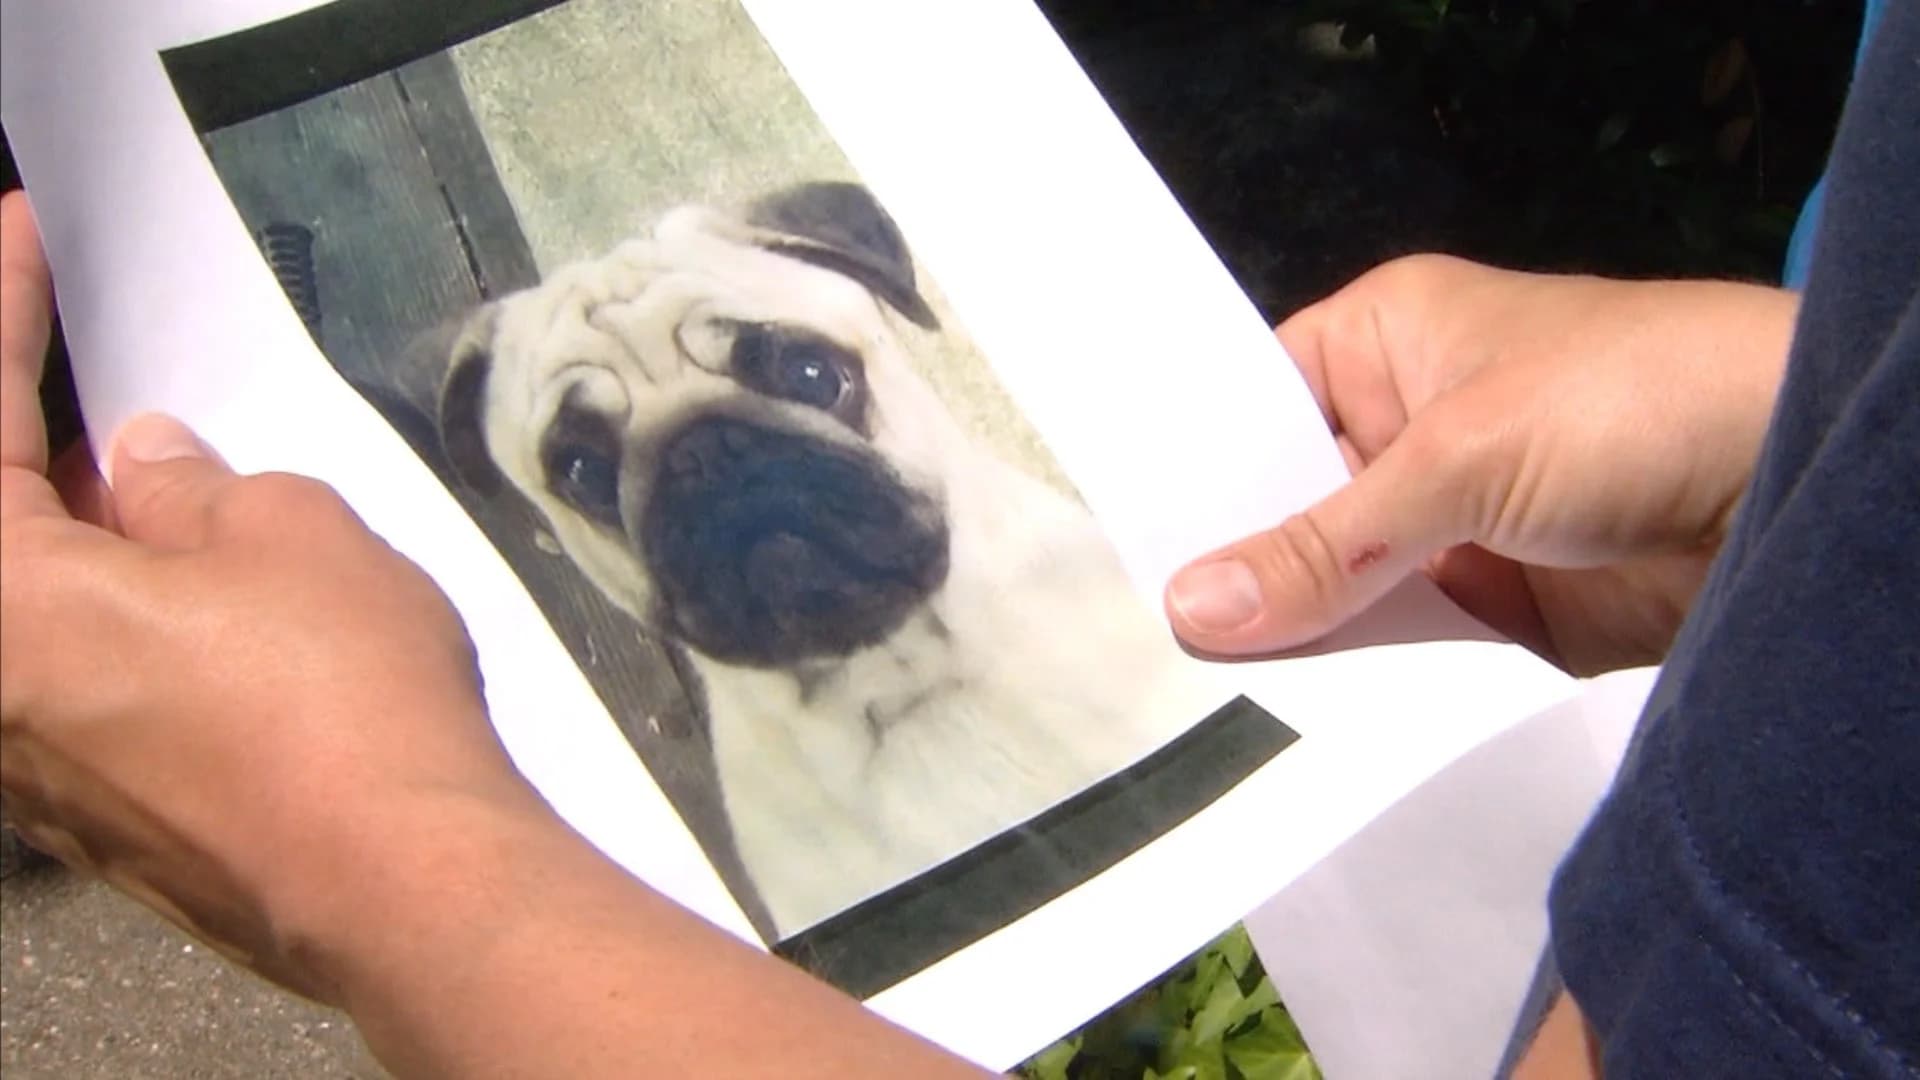 News 12 New Jersey viewers help find missing dog